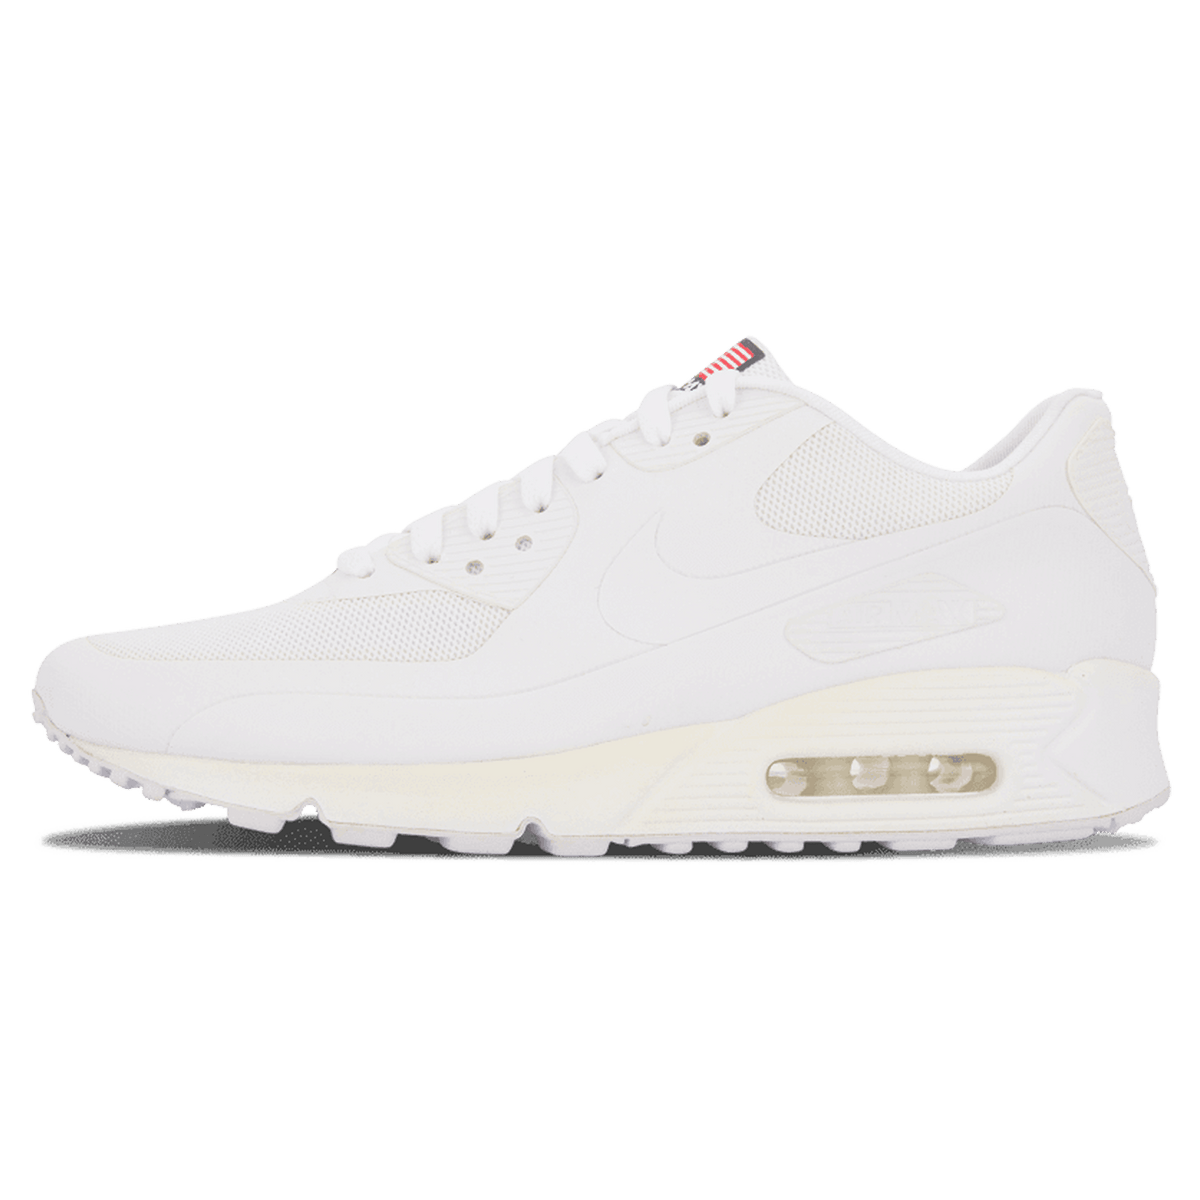 Nike Air Max 90 Hyperfuse QS 'Independence Day' White — Kick Game